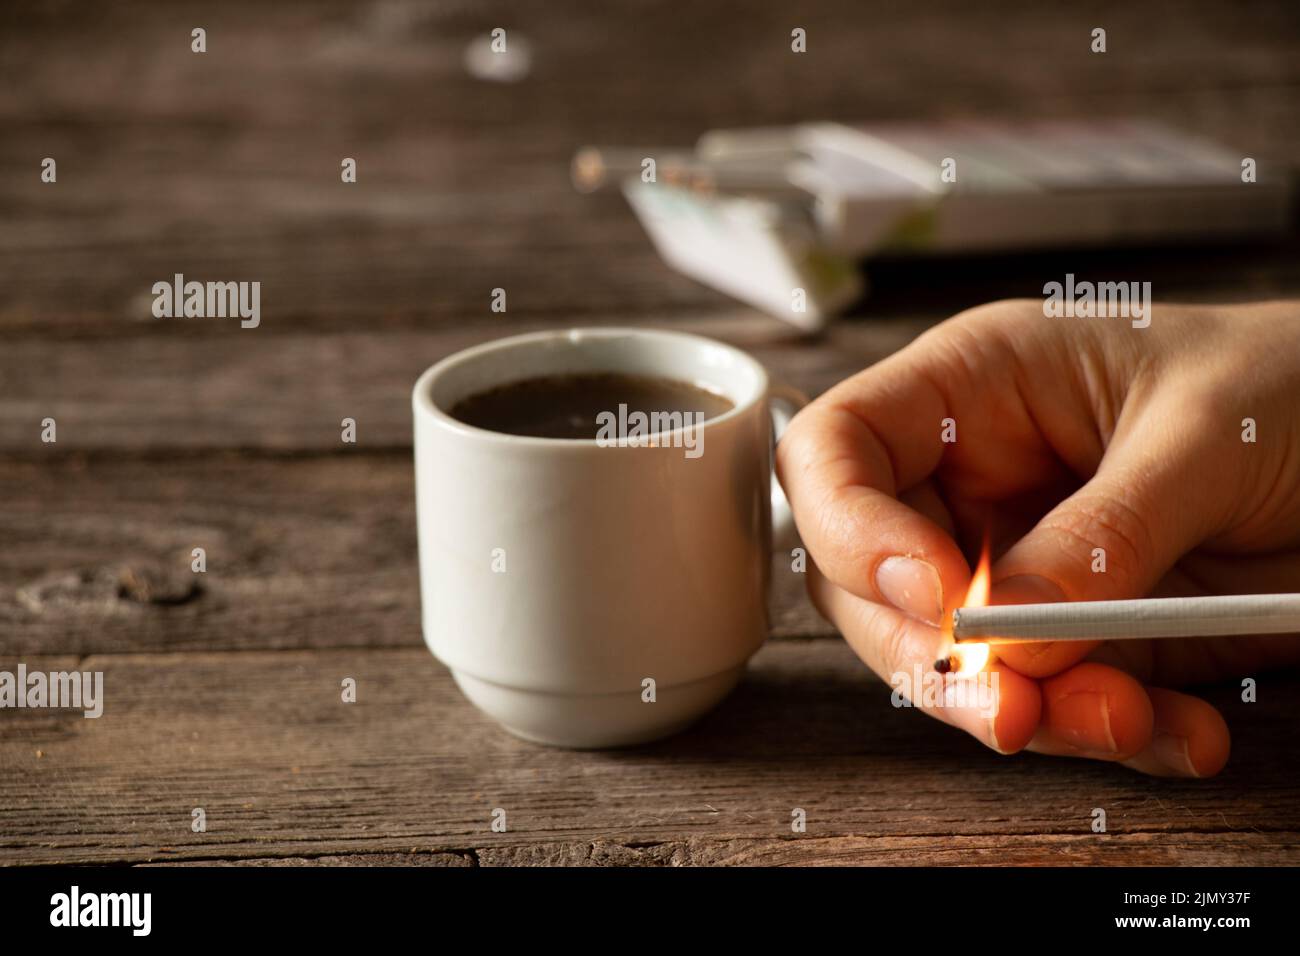 a cigarette in the hands of a girl on the table next to a cup of coffee, cigarettes and coffee, bad habits, smoking Stock Photo